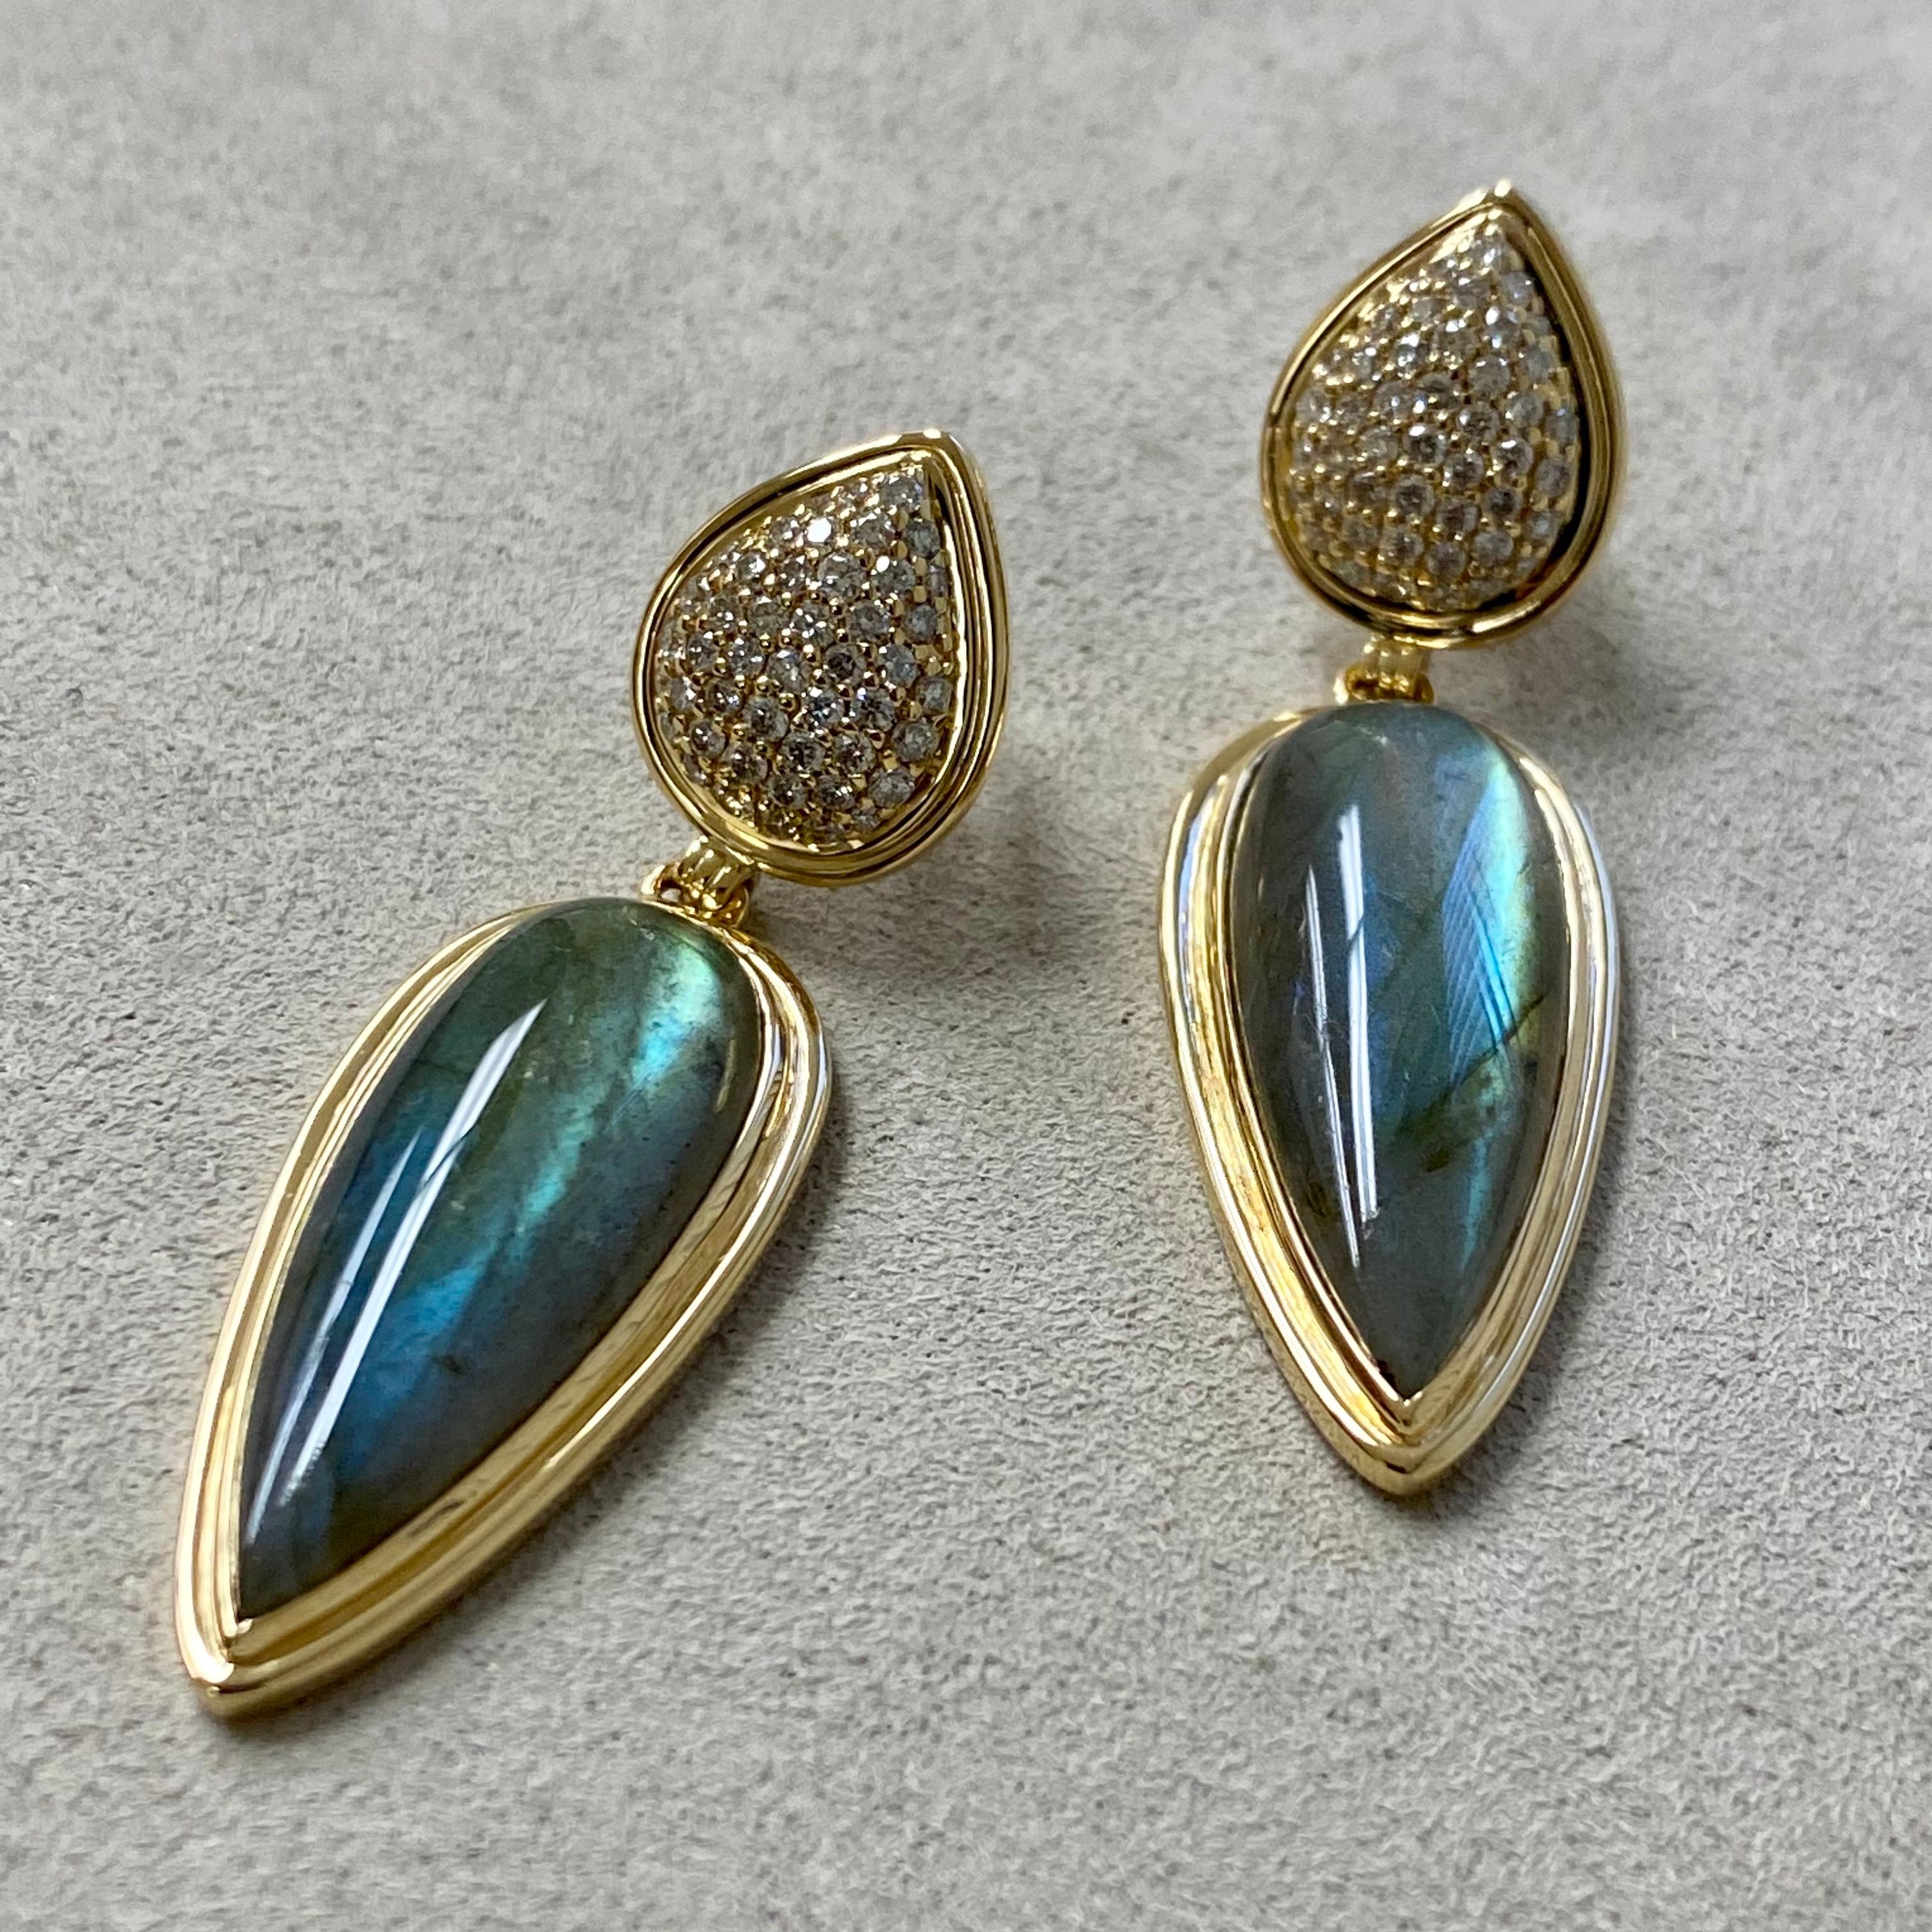 Created in 18 karat yellow gold
Labradorite 18 carats approx.
Diamonds 0.70 carat approx.
18kyg post backs for pierced ears

Exquisitely forged in 18 karat yellow gold and featuring labradorite totaling 18 carats and 0.70 carats of diamonds, these